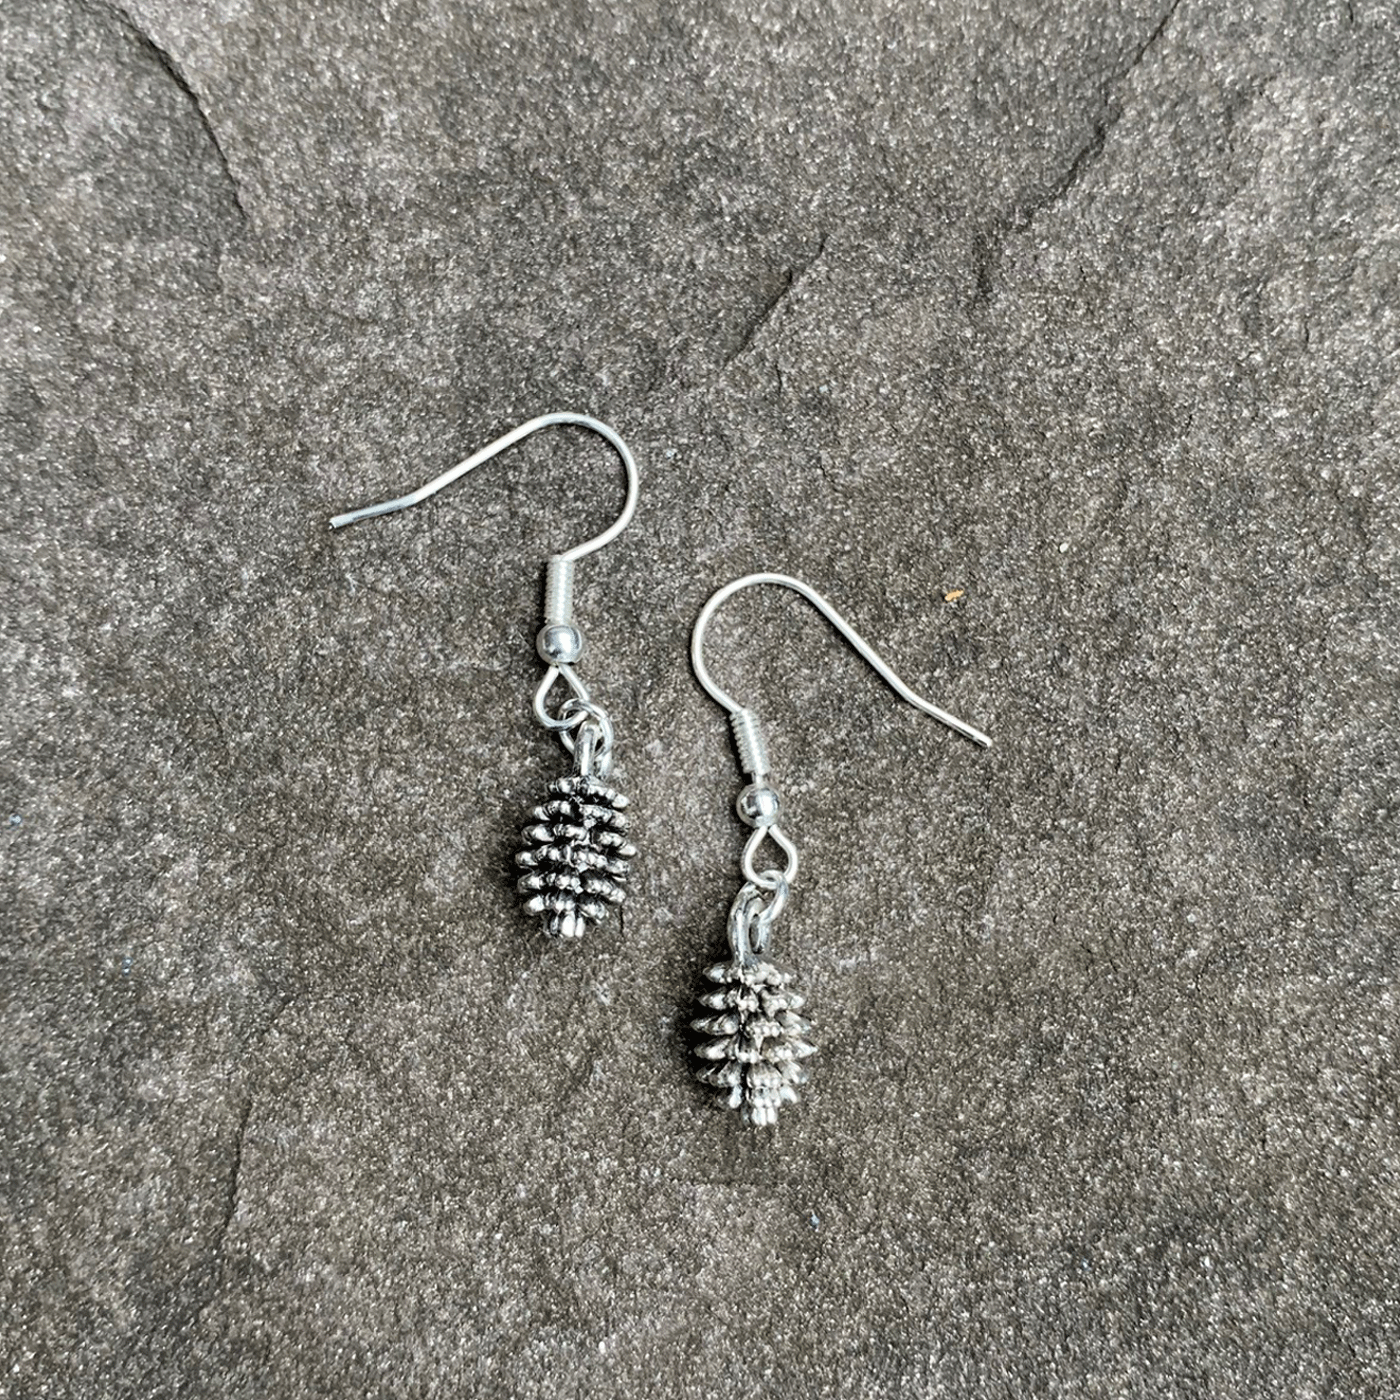 Silver Pine Cone Earrings - Made In Canada Gifts